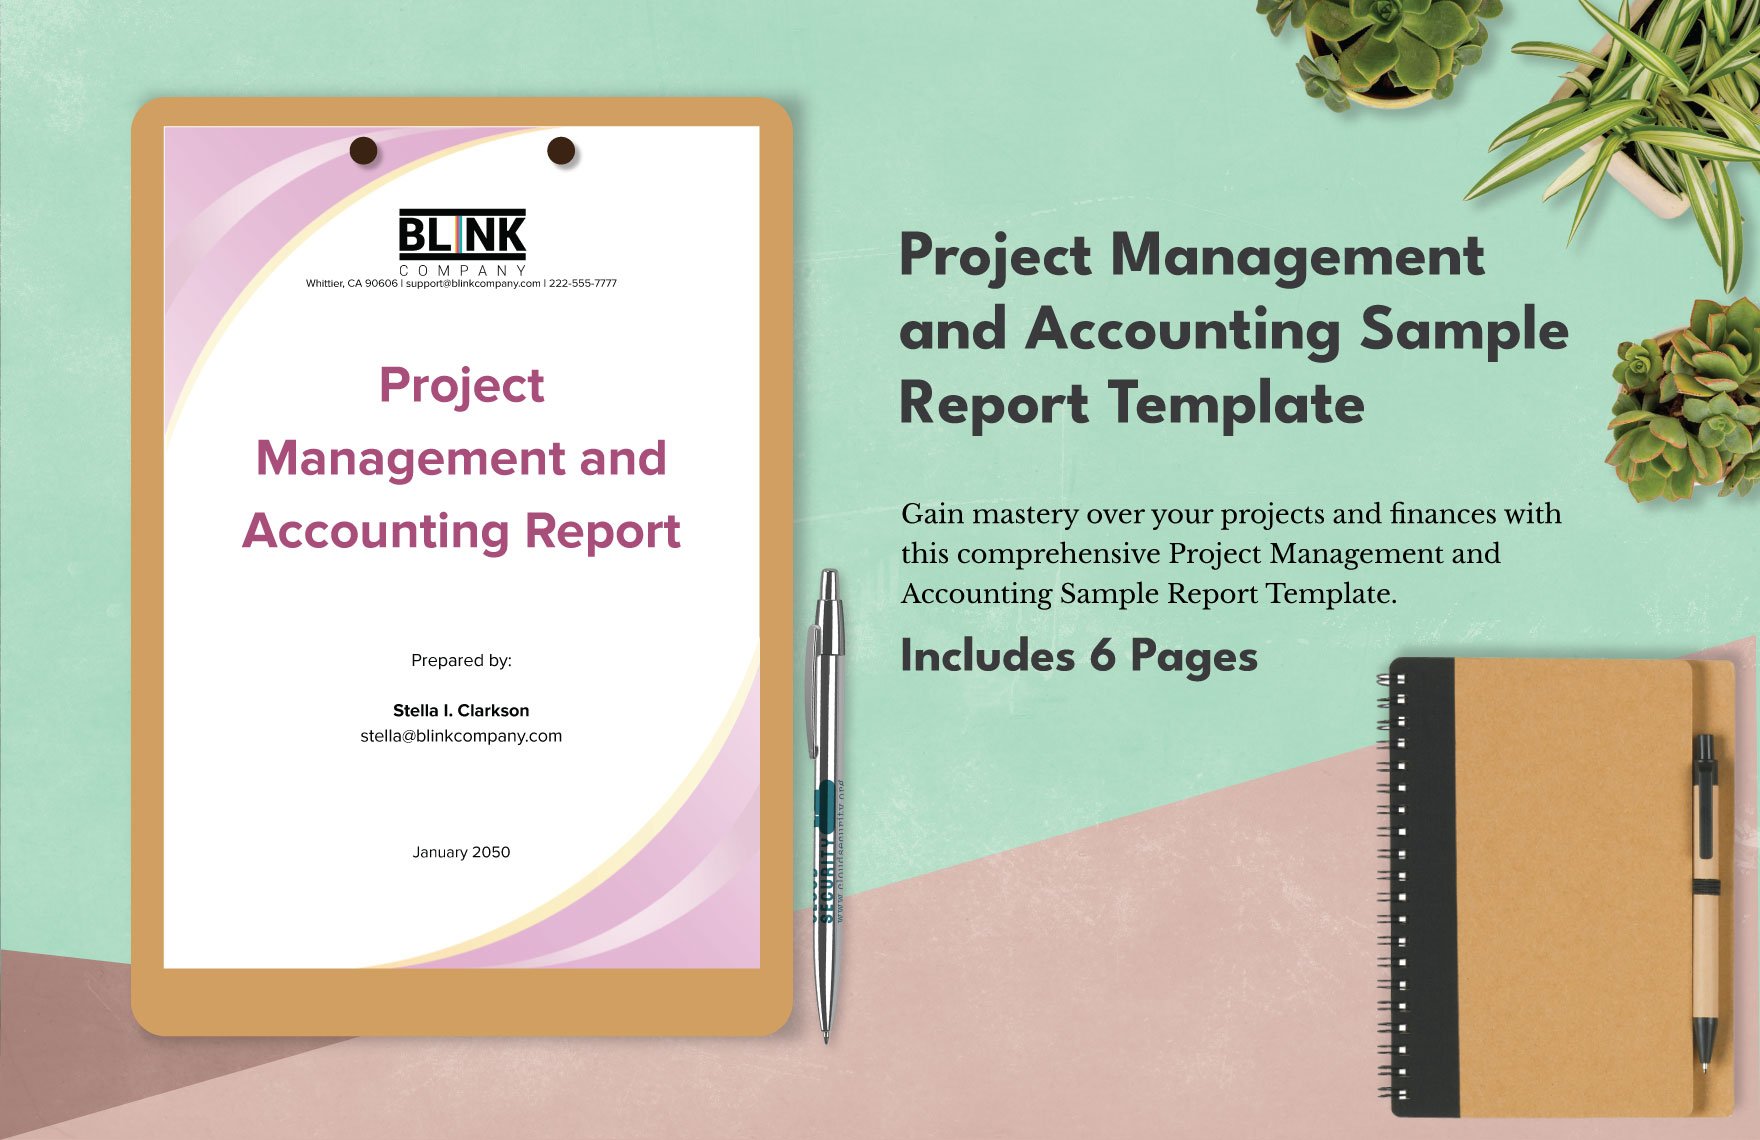 Project Management and Accounting Sample Report Template